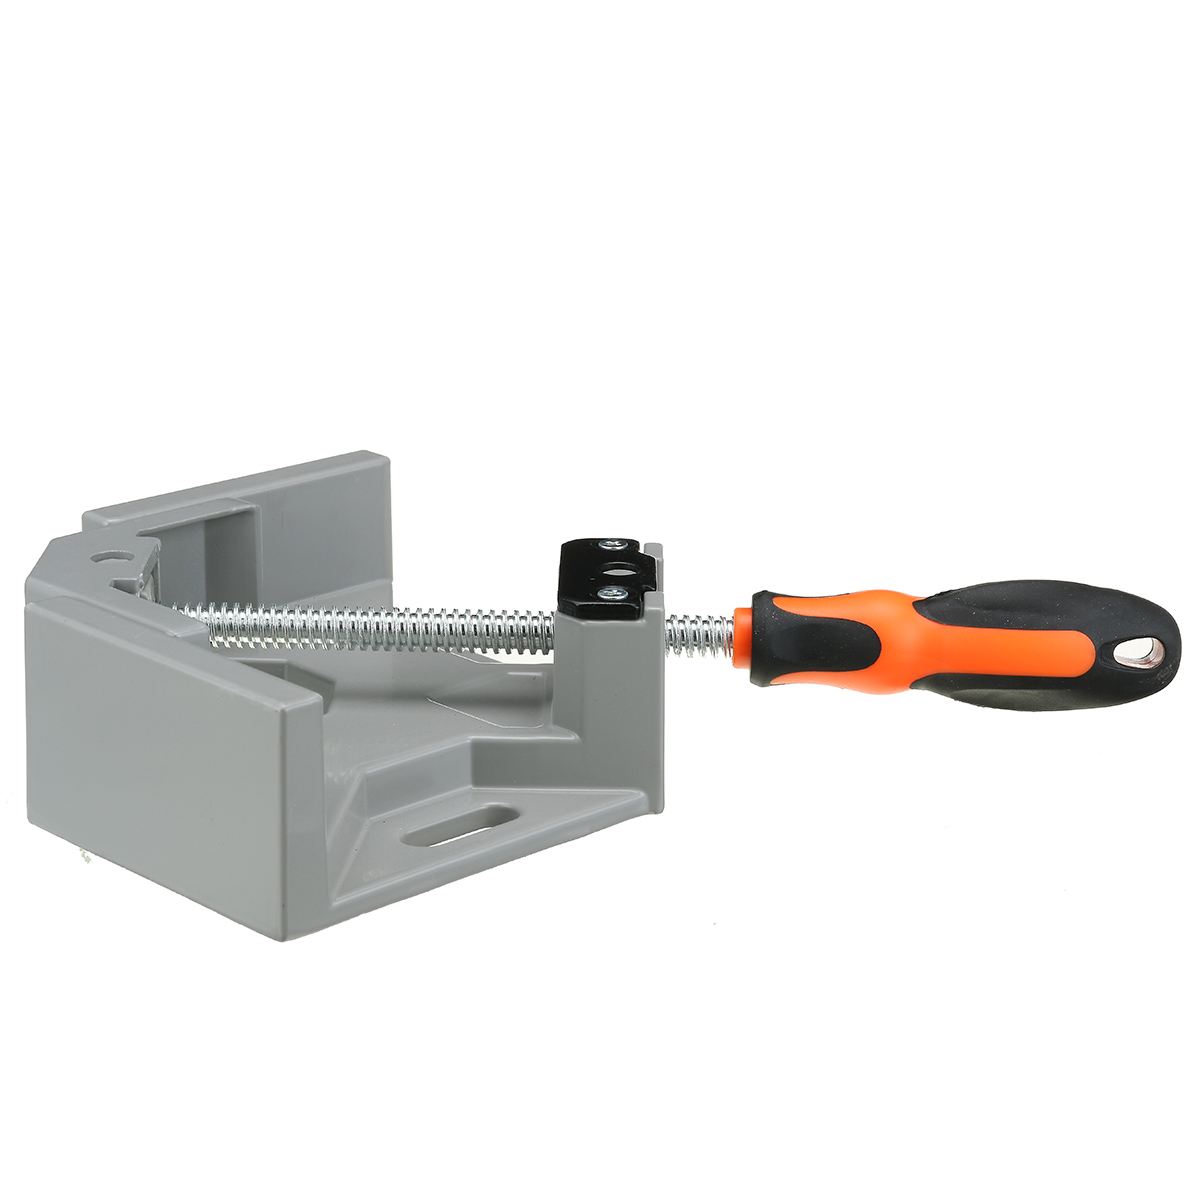 90-Degree-Quick-Release-Corner-Clamp-Right-Angle-Welding-Woodworking-Photo-Frame-Clamping-Tool-1768833-9